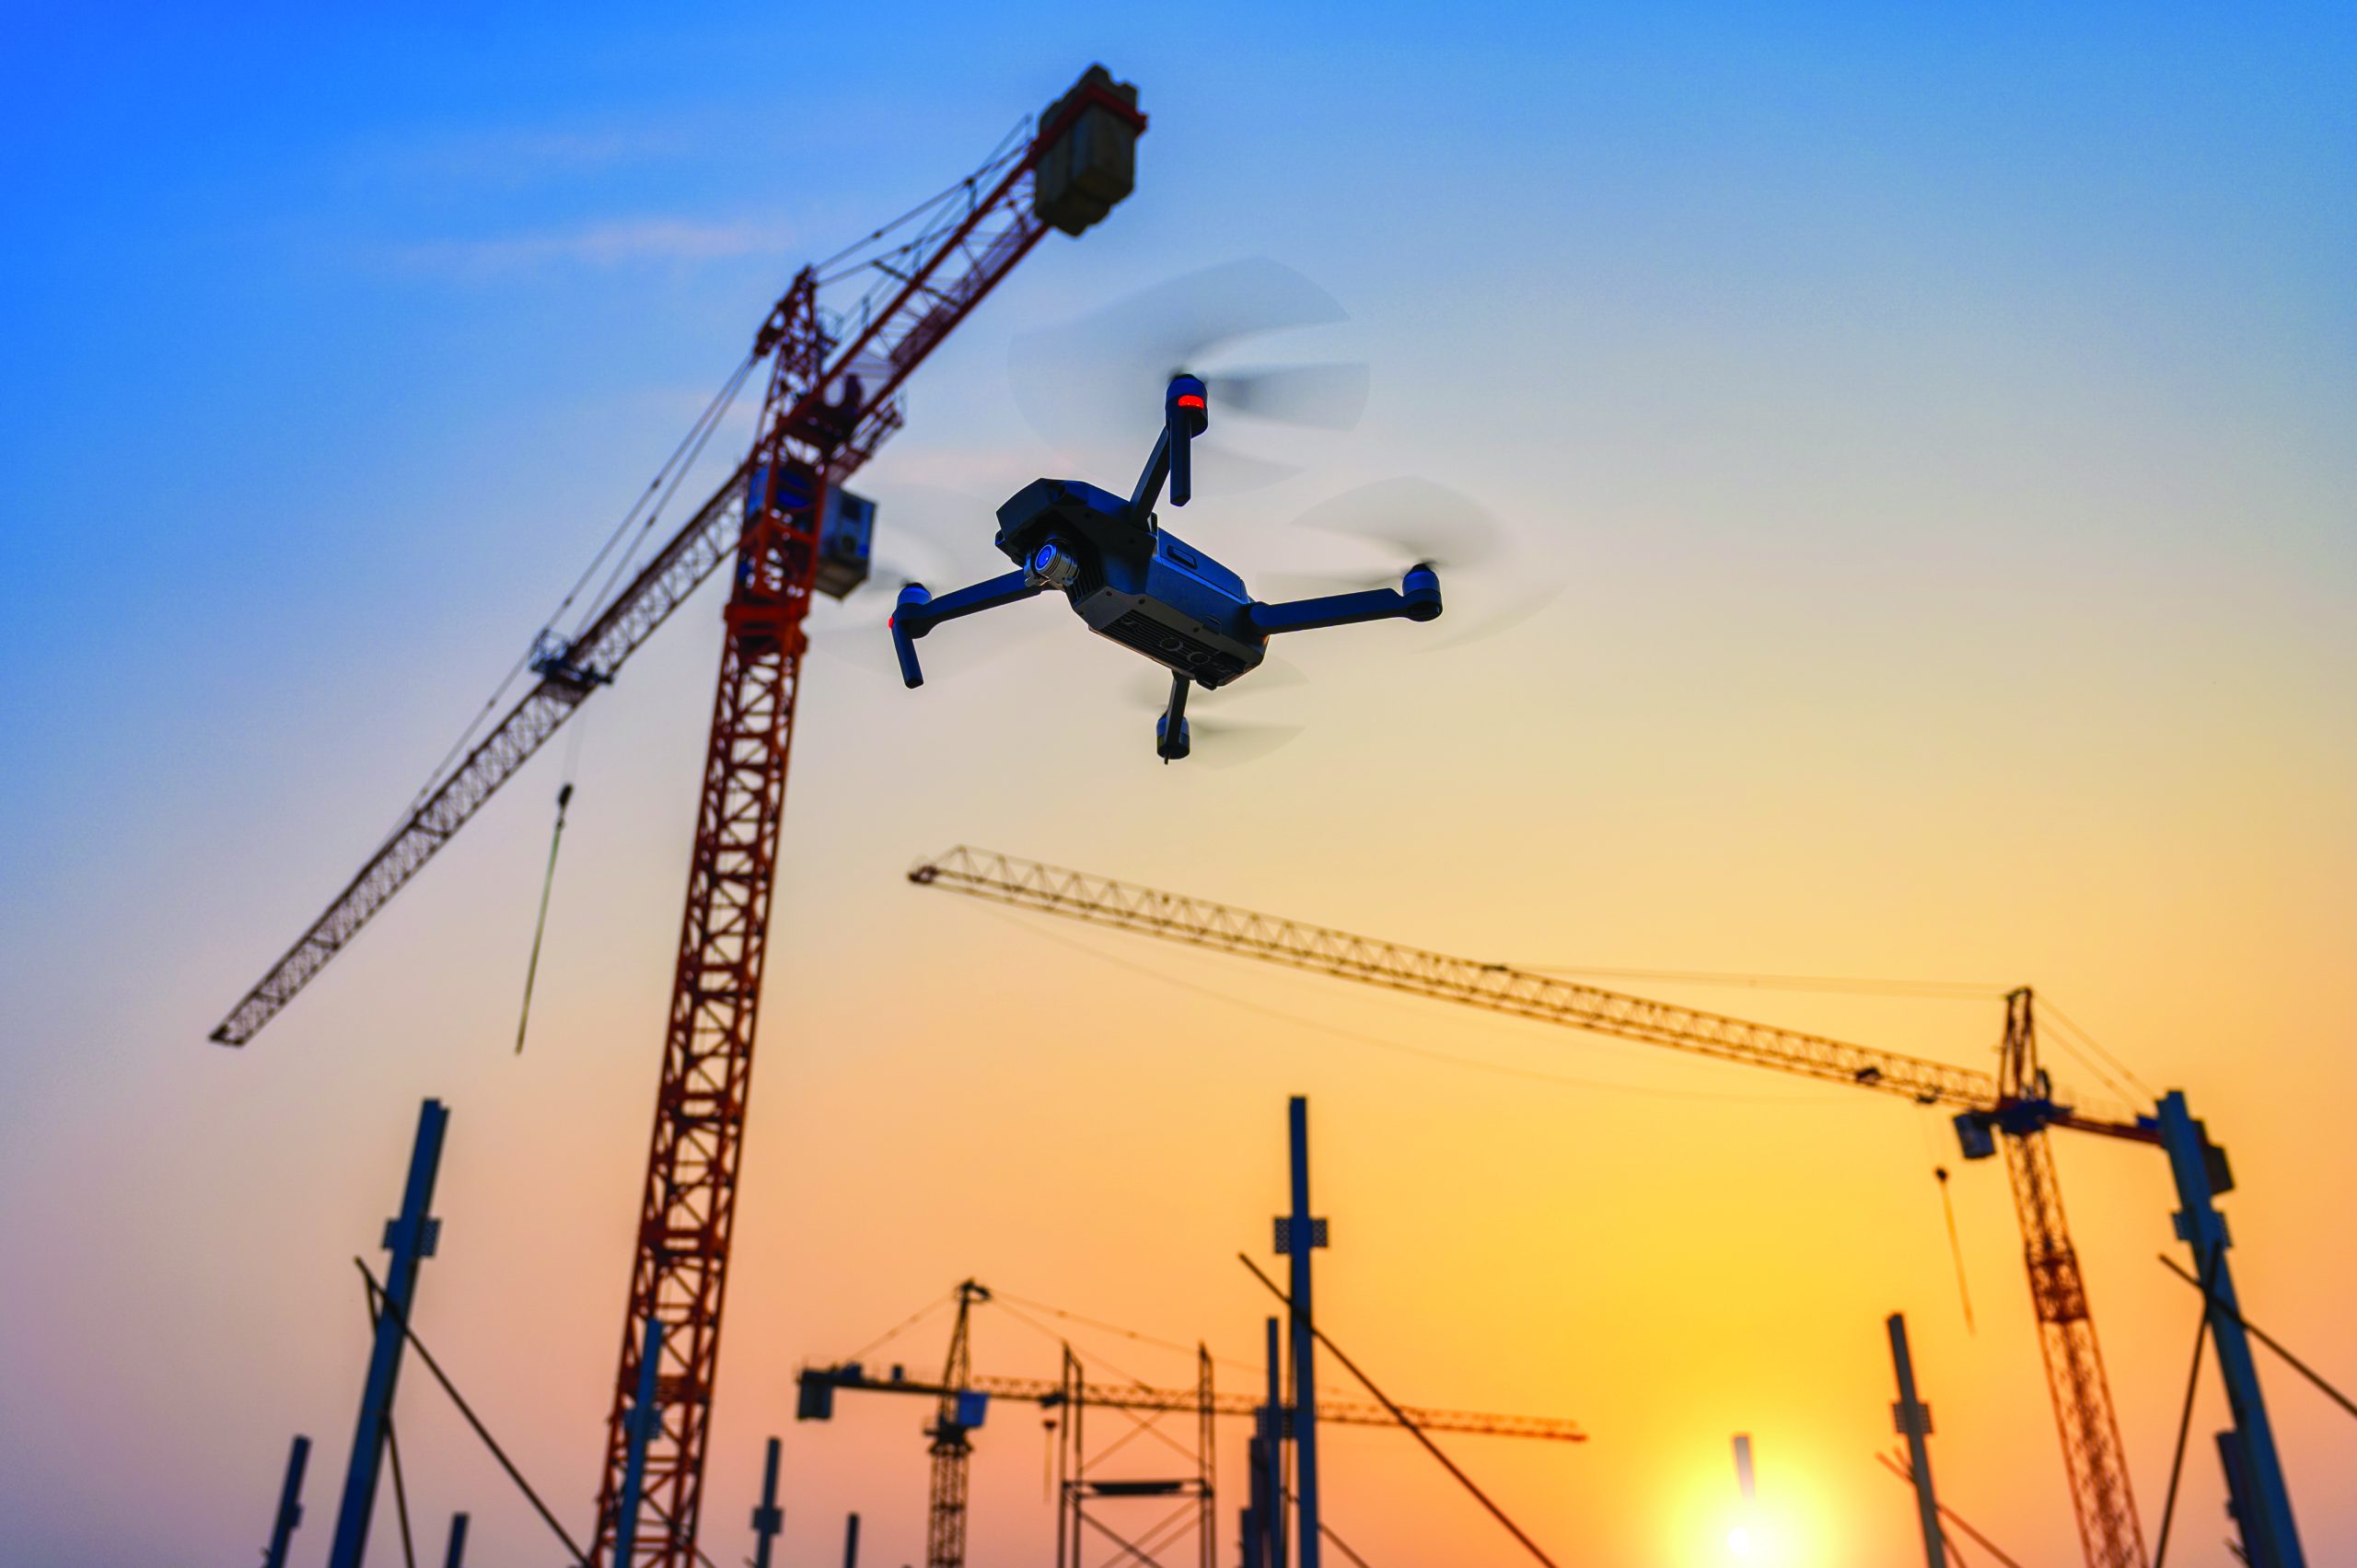 Drone over construction site. video surveillance or industrial i